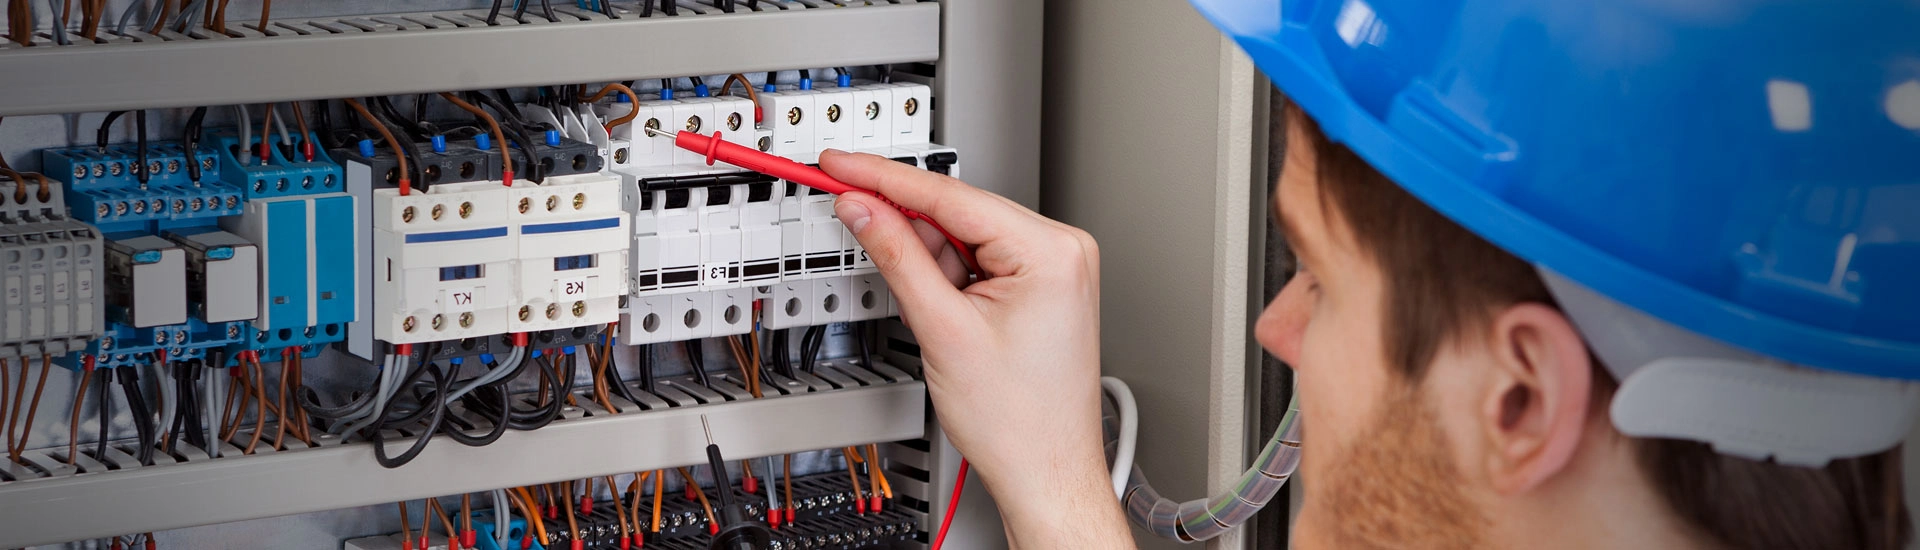 electrician who uses electrical contractor software works on lighting control panel